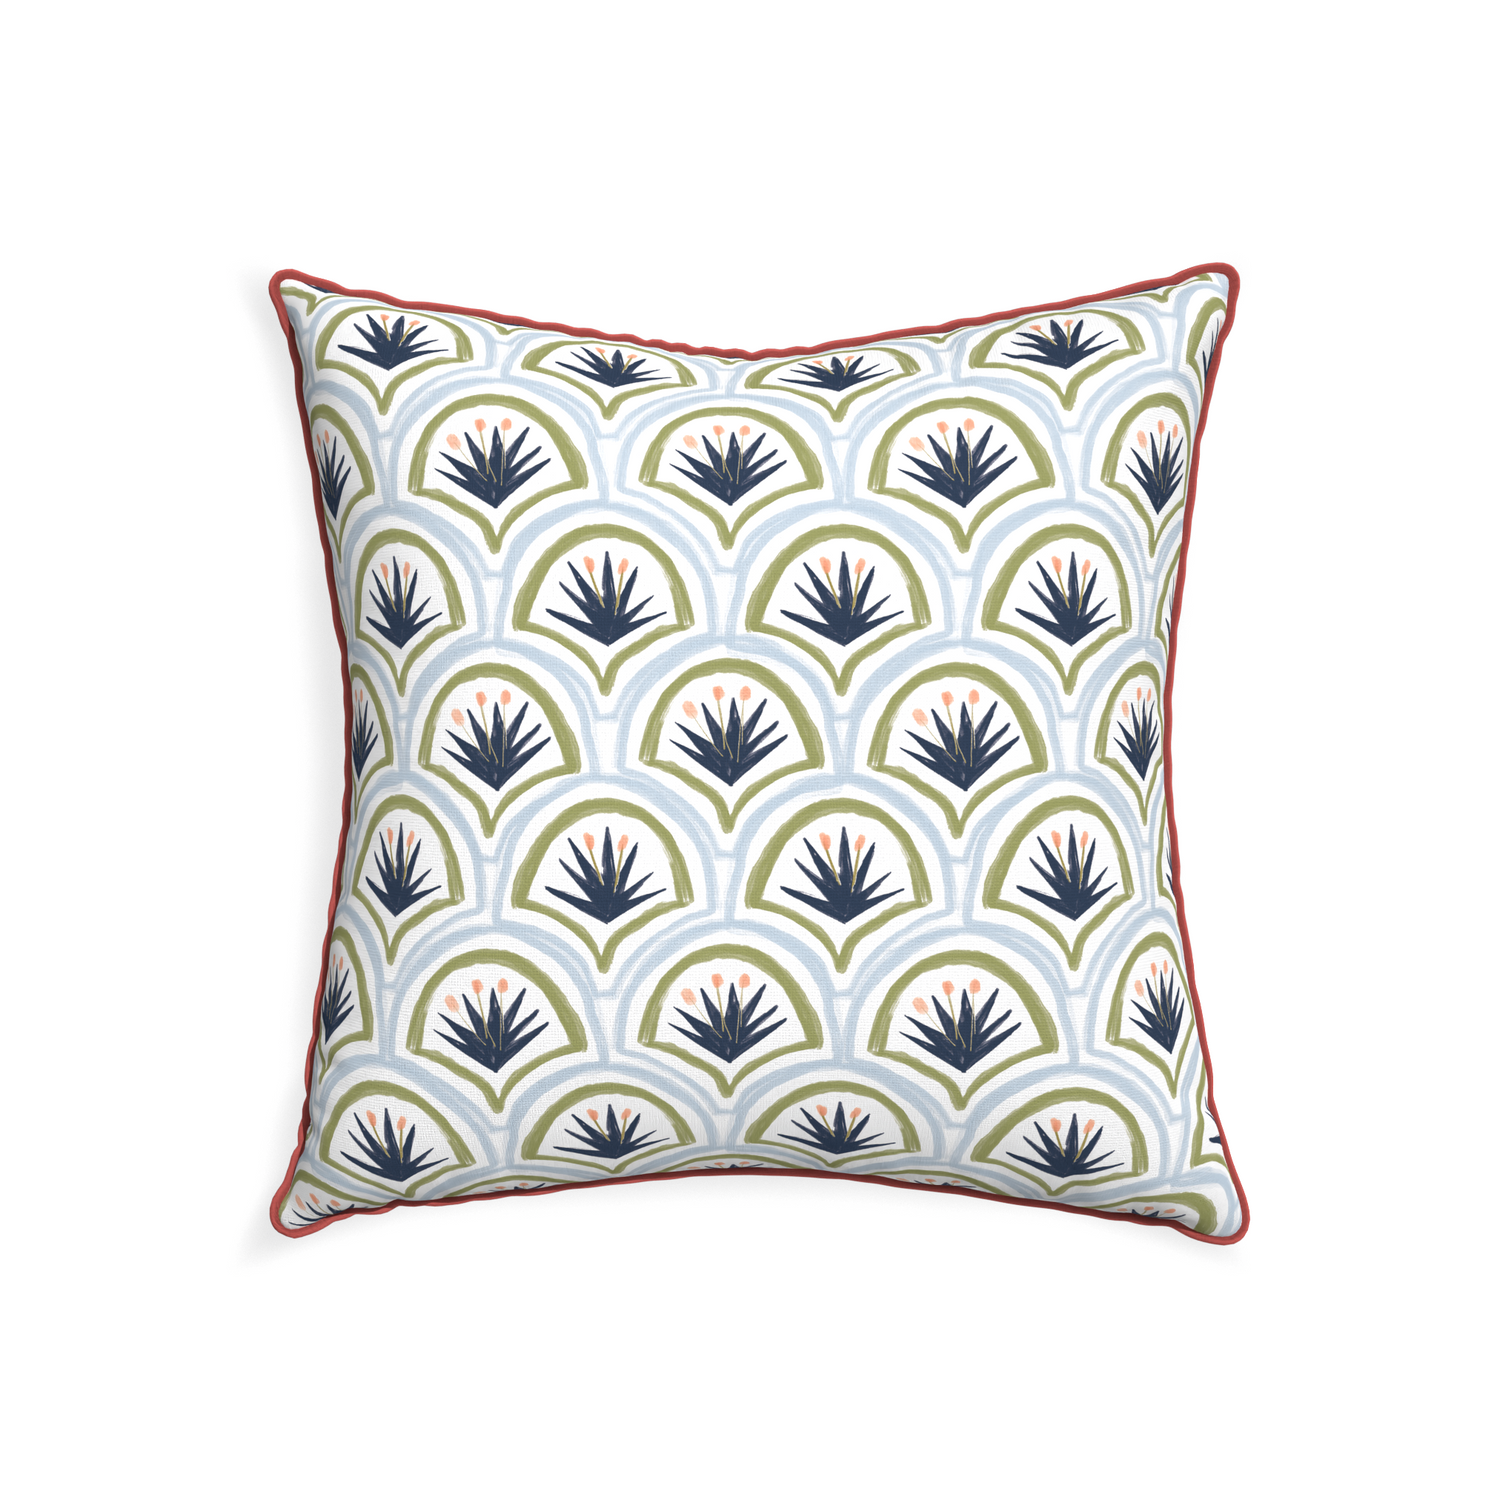 22-square thatcher midnight custom art deco palm patternpillow with c piping on white background